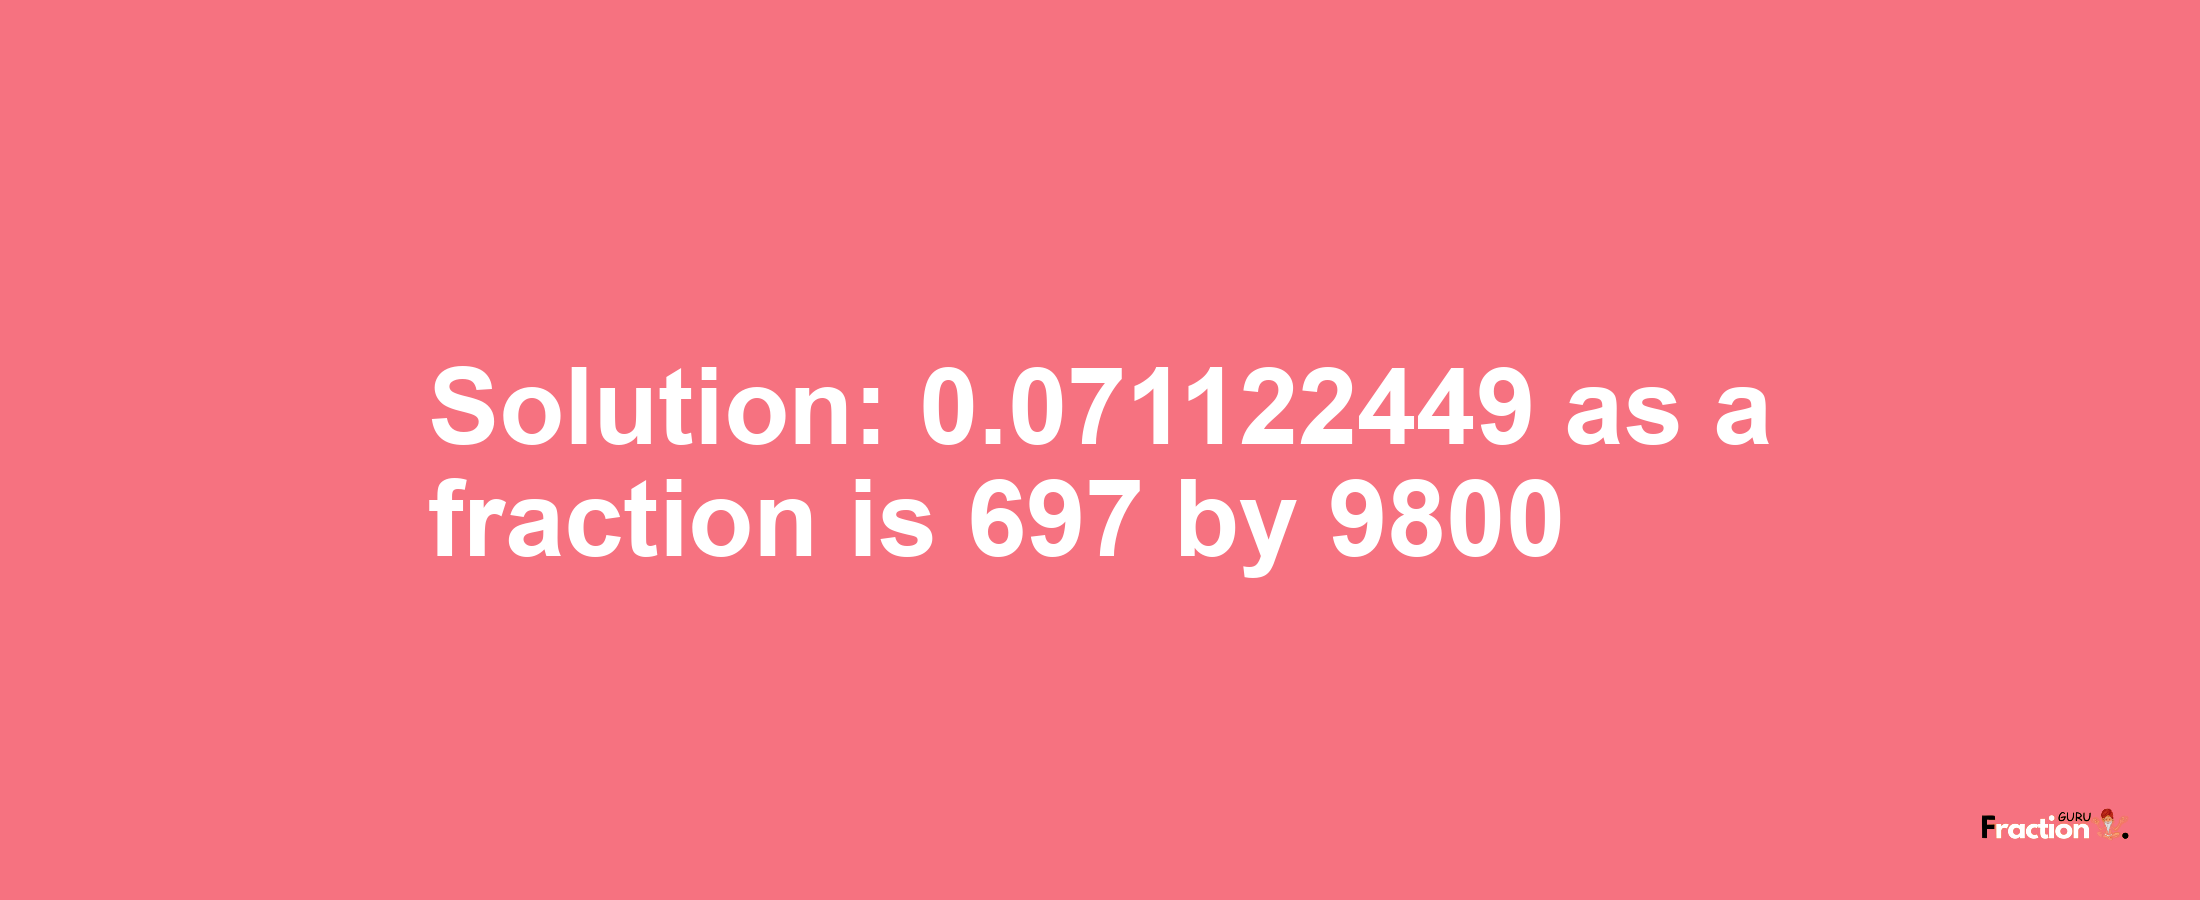 Solution:0.071122449 as a fraction is 697/9800